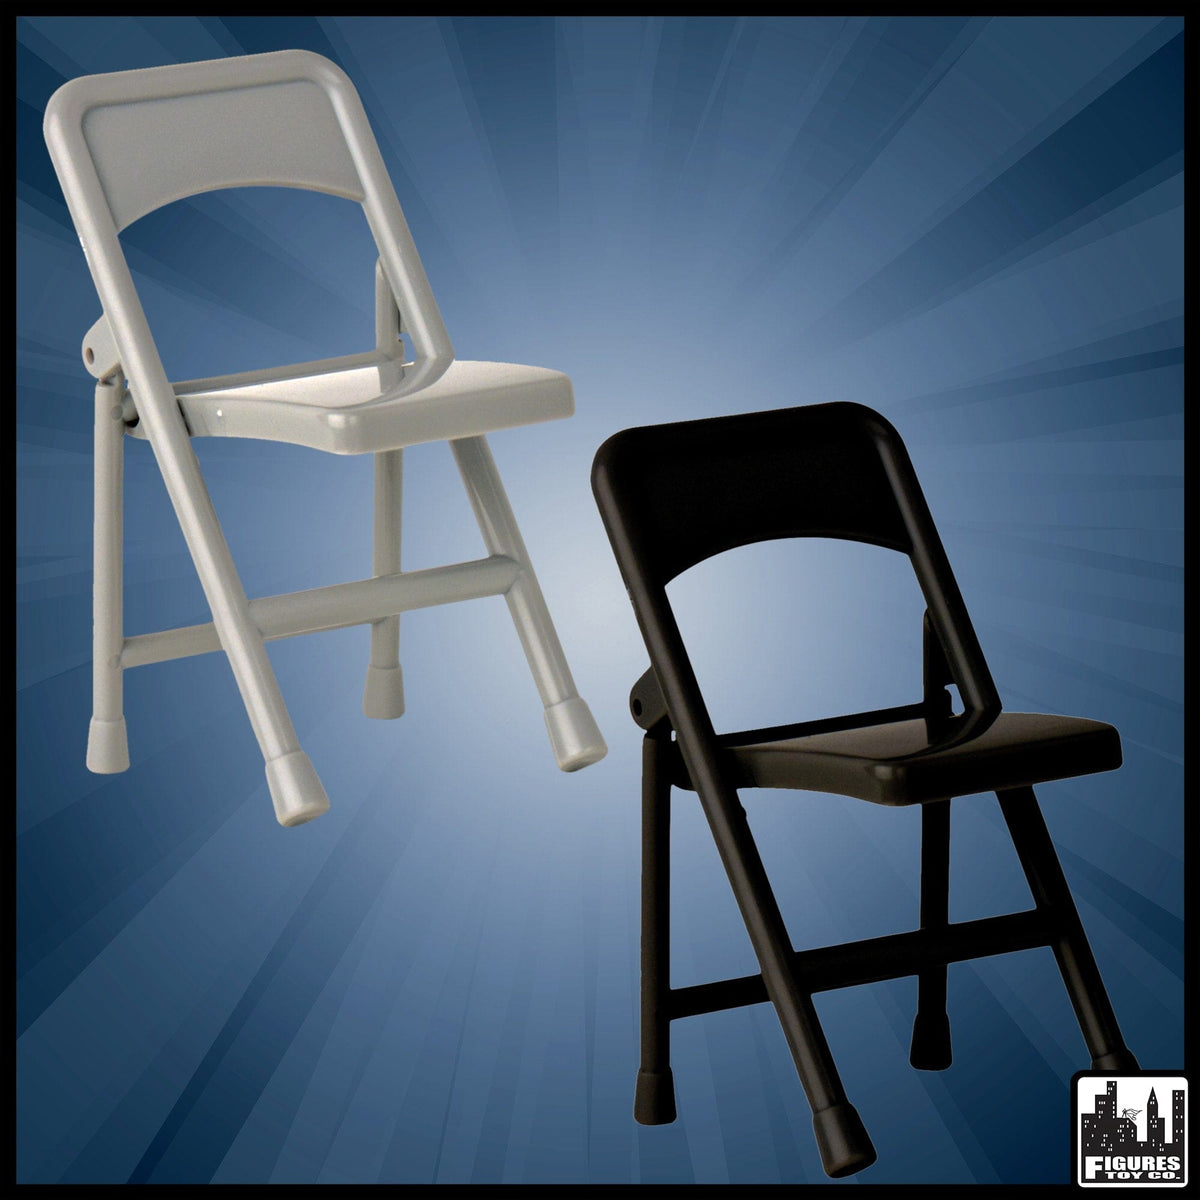 Set of 2 Folding Chairs for WWE Wrestling Action Figures: 1 Black &amp; 1 Gray